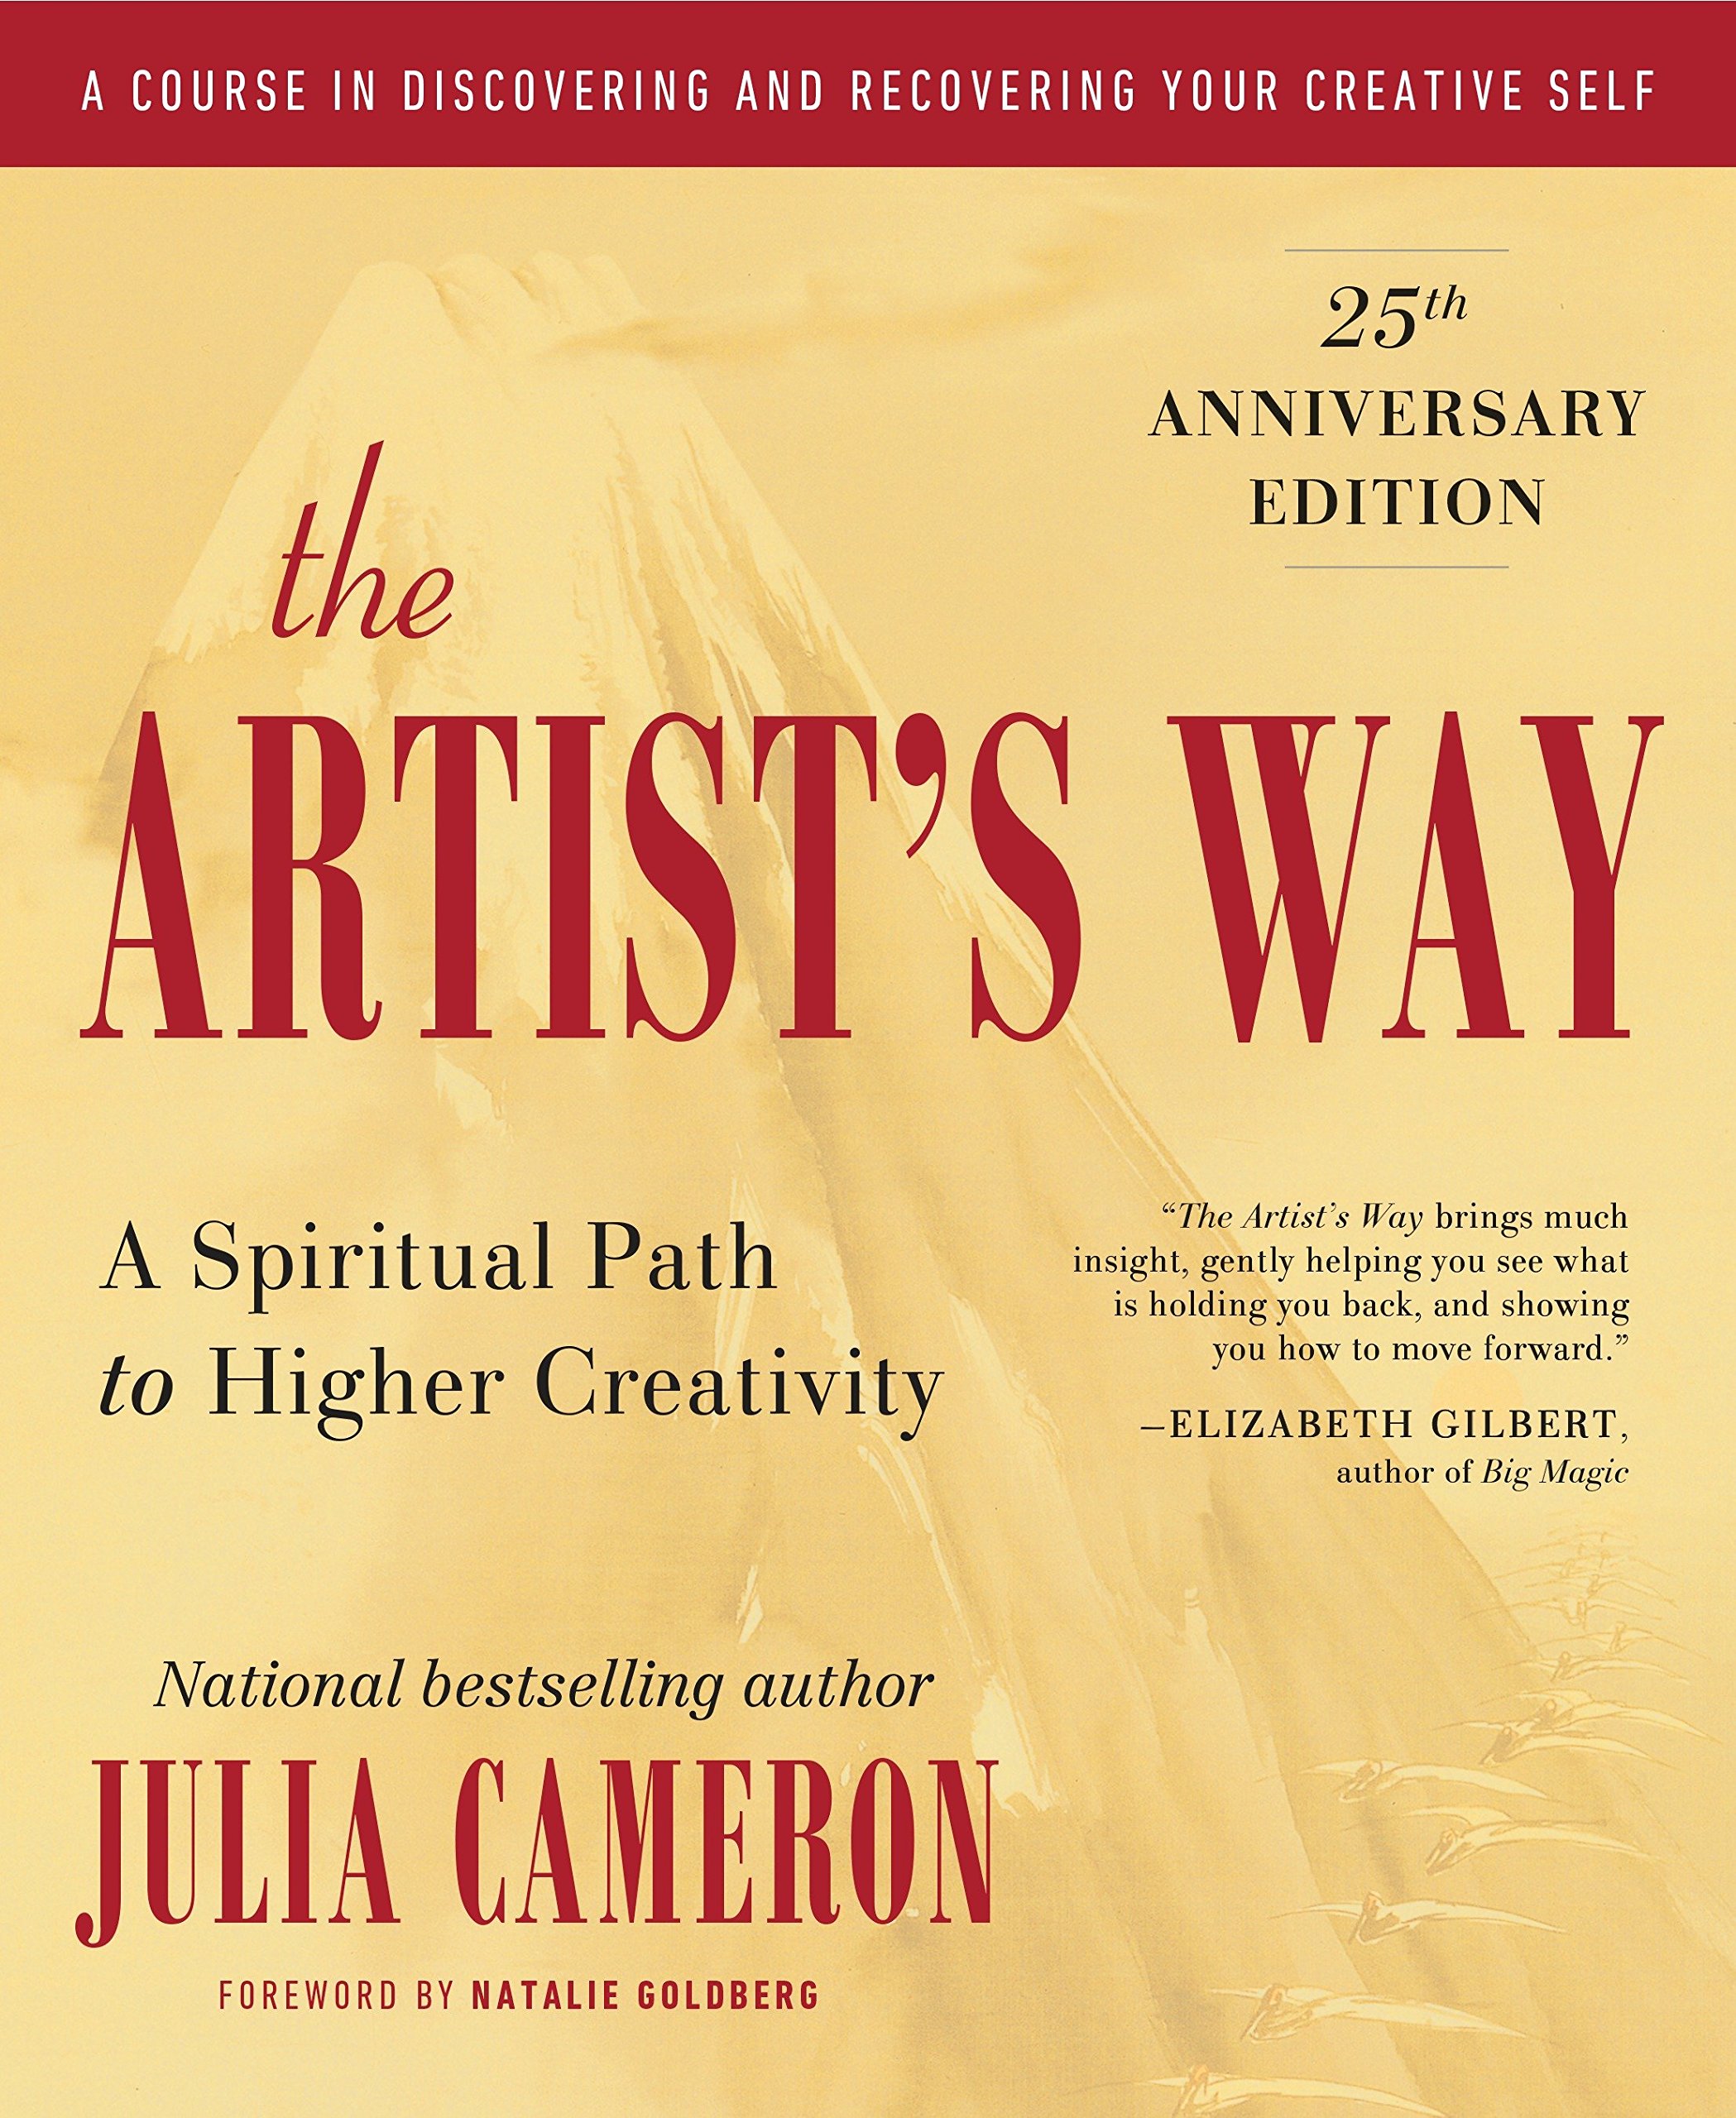 The Artists Way book cover